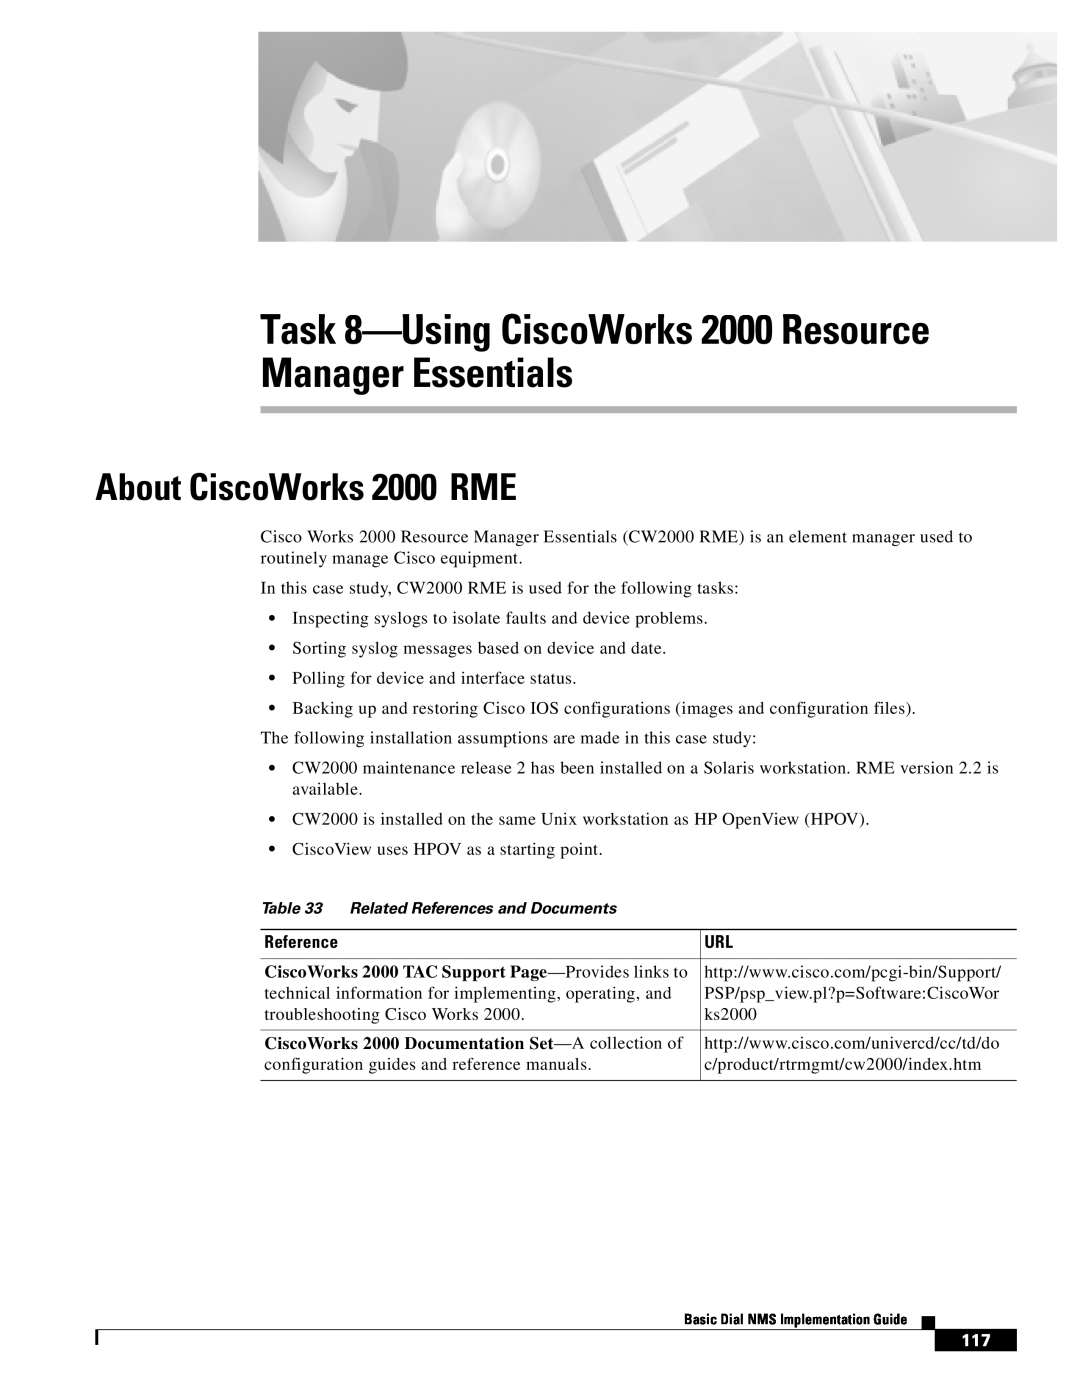 Cisco Systems Dial NMS manual Task 8-Using CiscoWorks 2000 Resource Manager Essentials, About CiscoWorks 2000 RME 